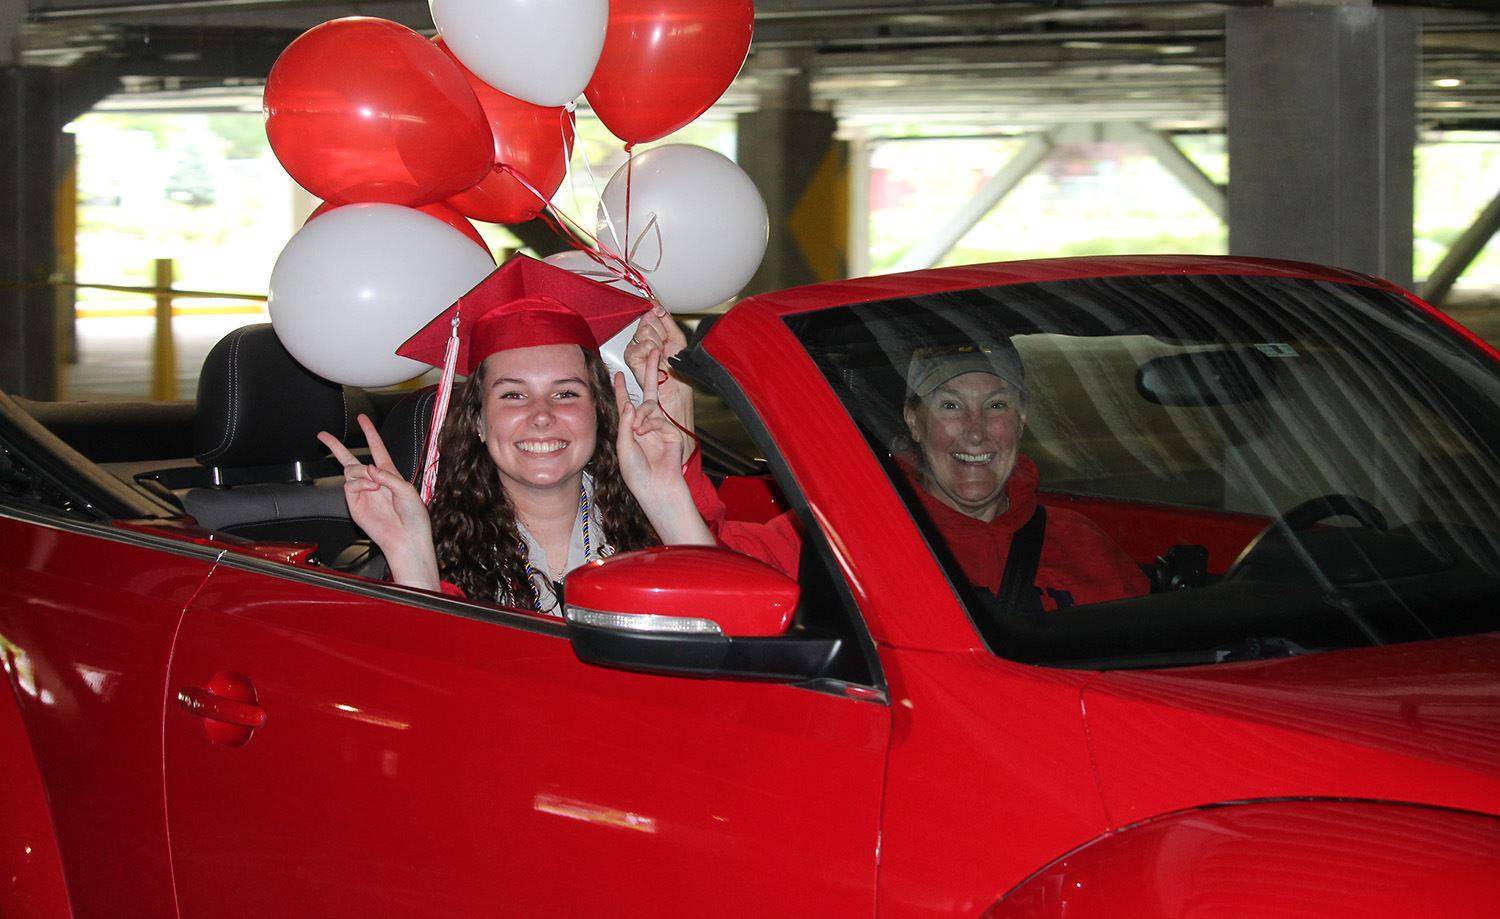 Sydney Fortner and her mother, Laura Gattermeir Fortner, join the Mount Si High School Class of 2020 Parade and Graduation held June 19. Photo courtesy of Snoqualmie Valley School District